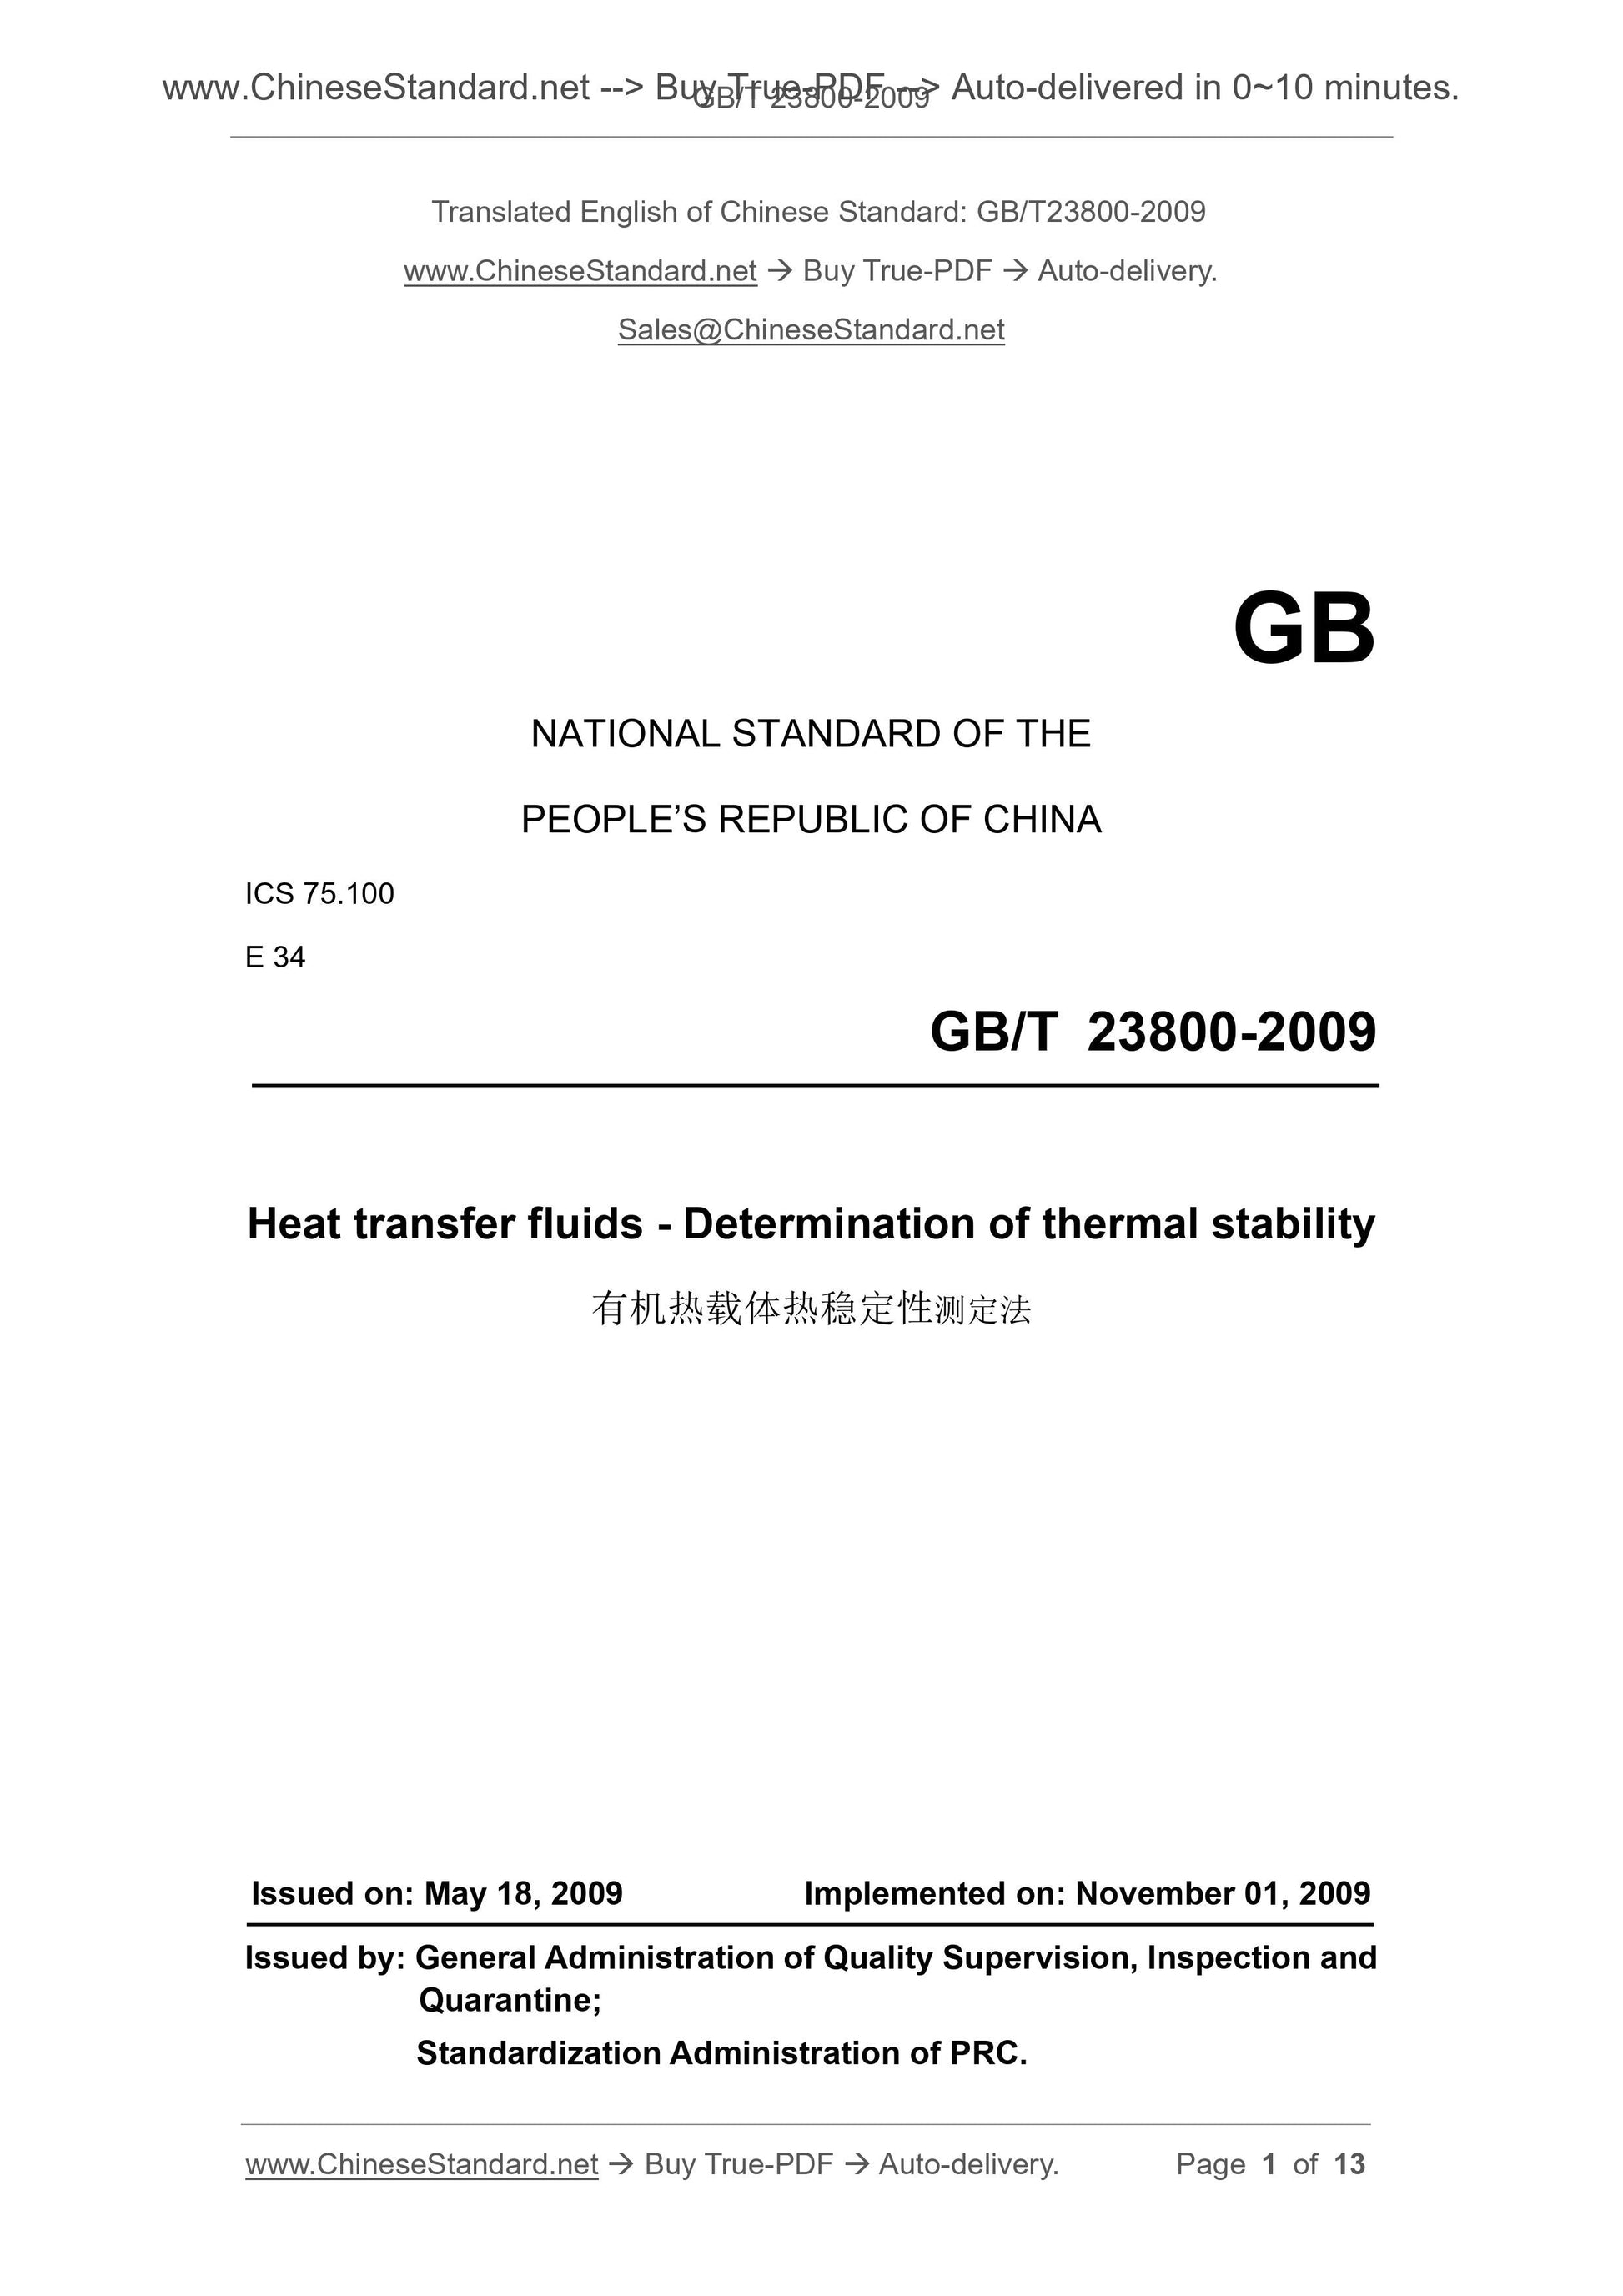 GB/T 23800-2009 Page 1